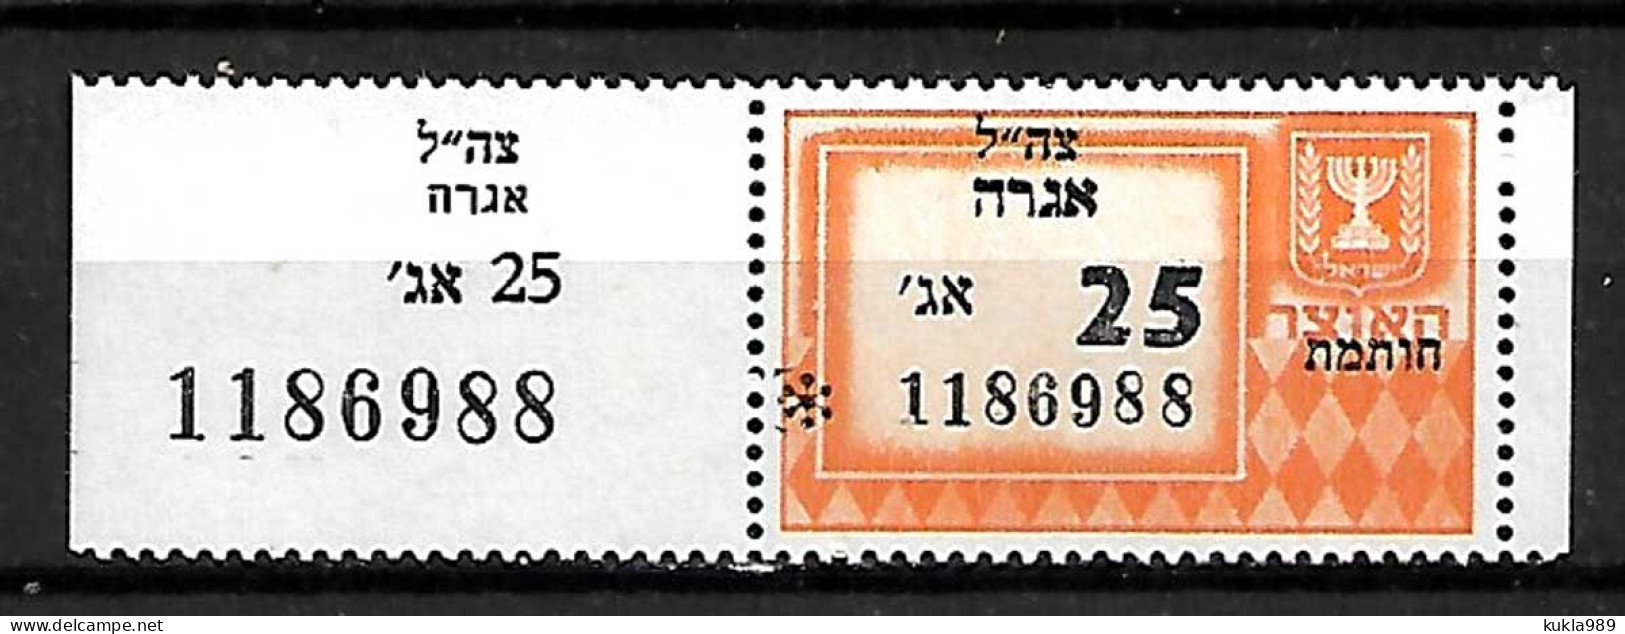 ISRAEL, AGRA REVENUE STAMP MILITARY ADMIN. FOR GAZA STRIP & SINAI, 1975, 25Ag., TAB, MNH - Unused Stamps (with Tabs)